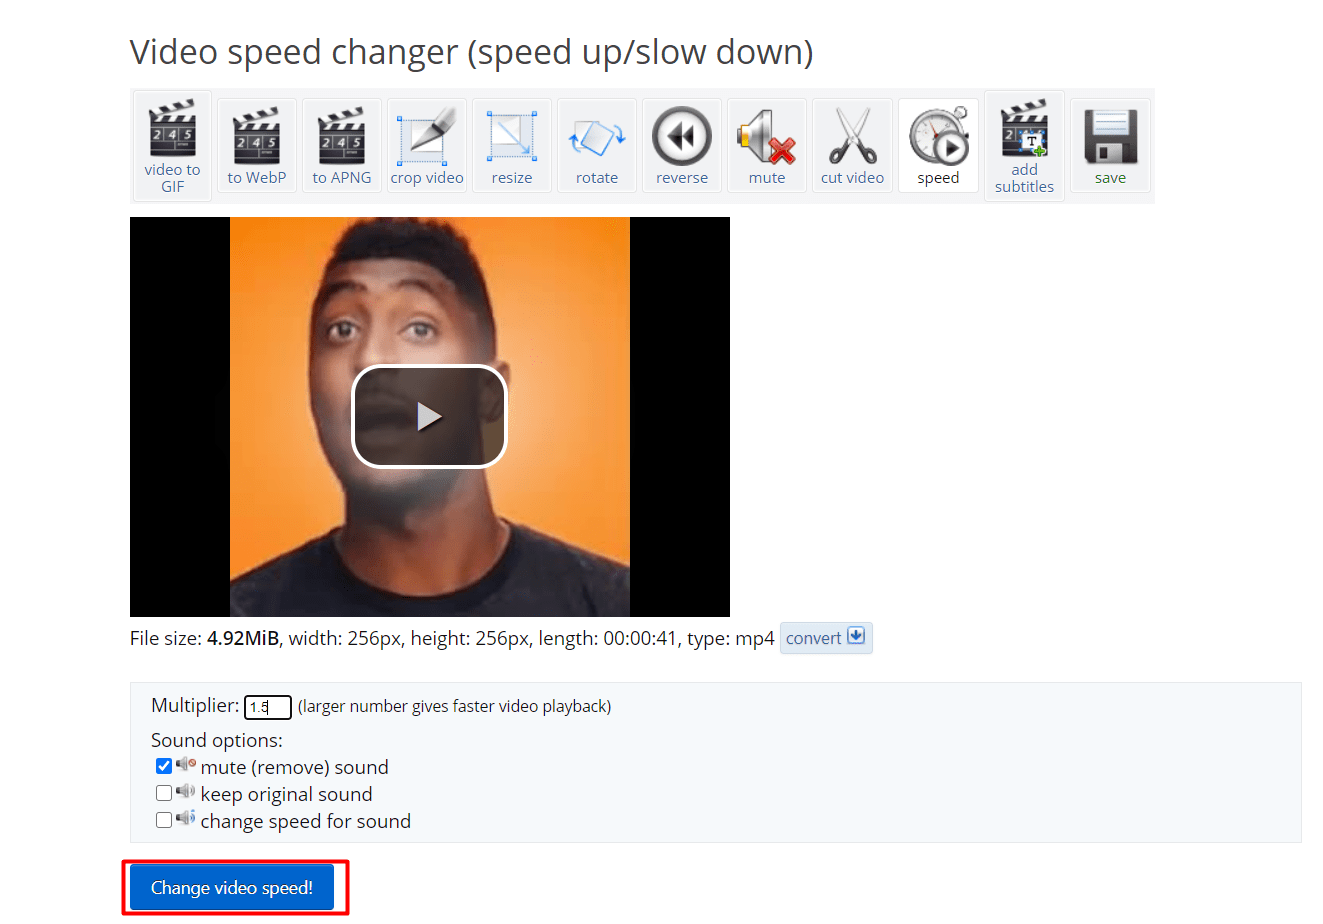 change video speed to 1.5x